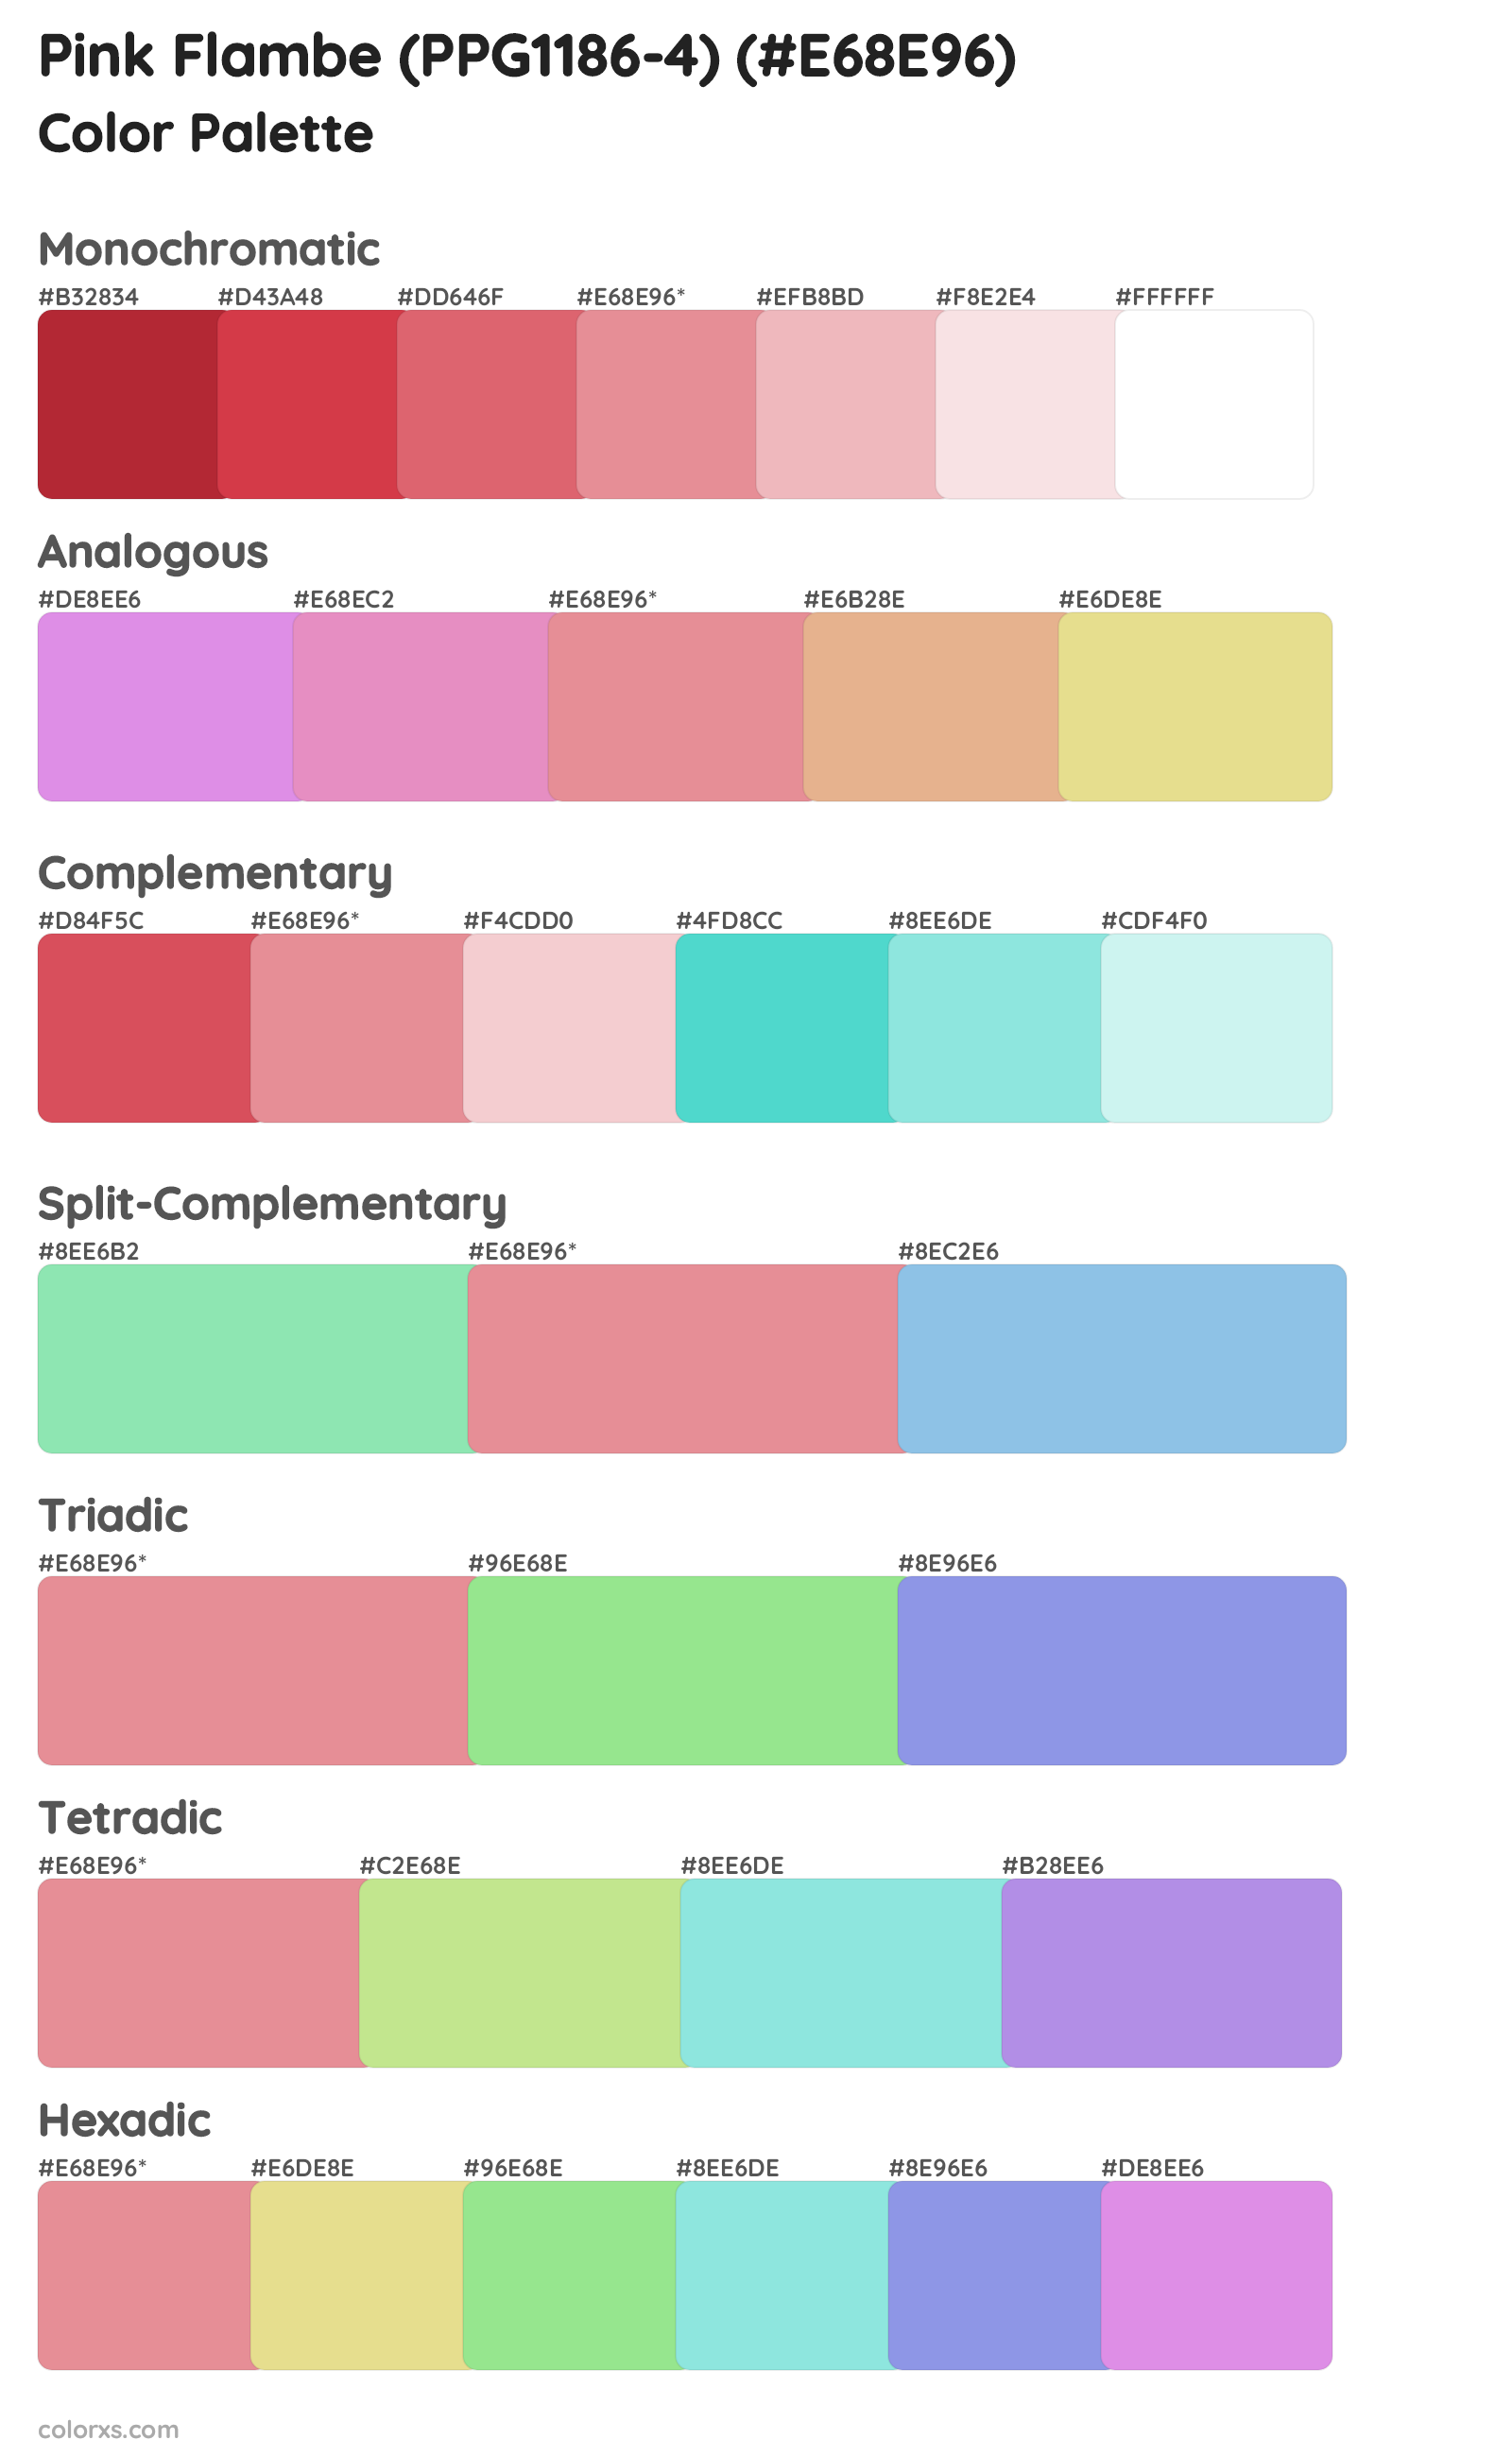 Pink Flambe (PPG1186-4) Color Scheme Palettes